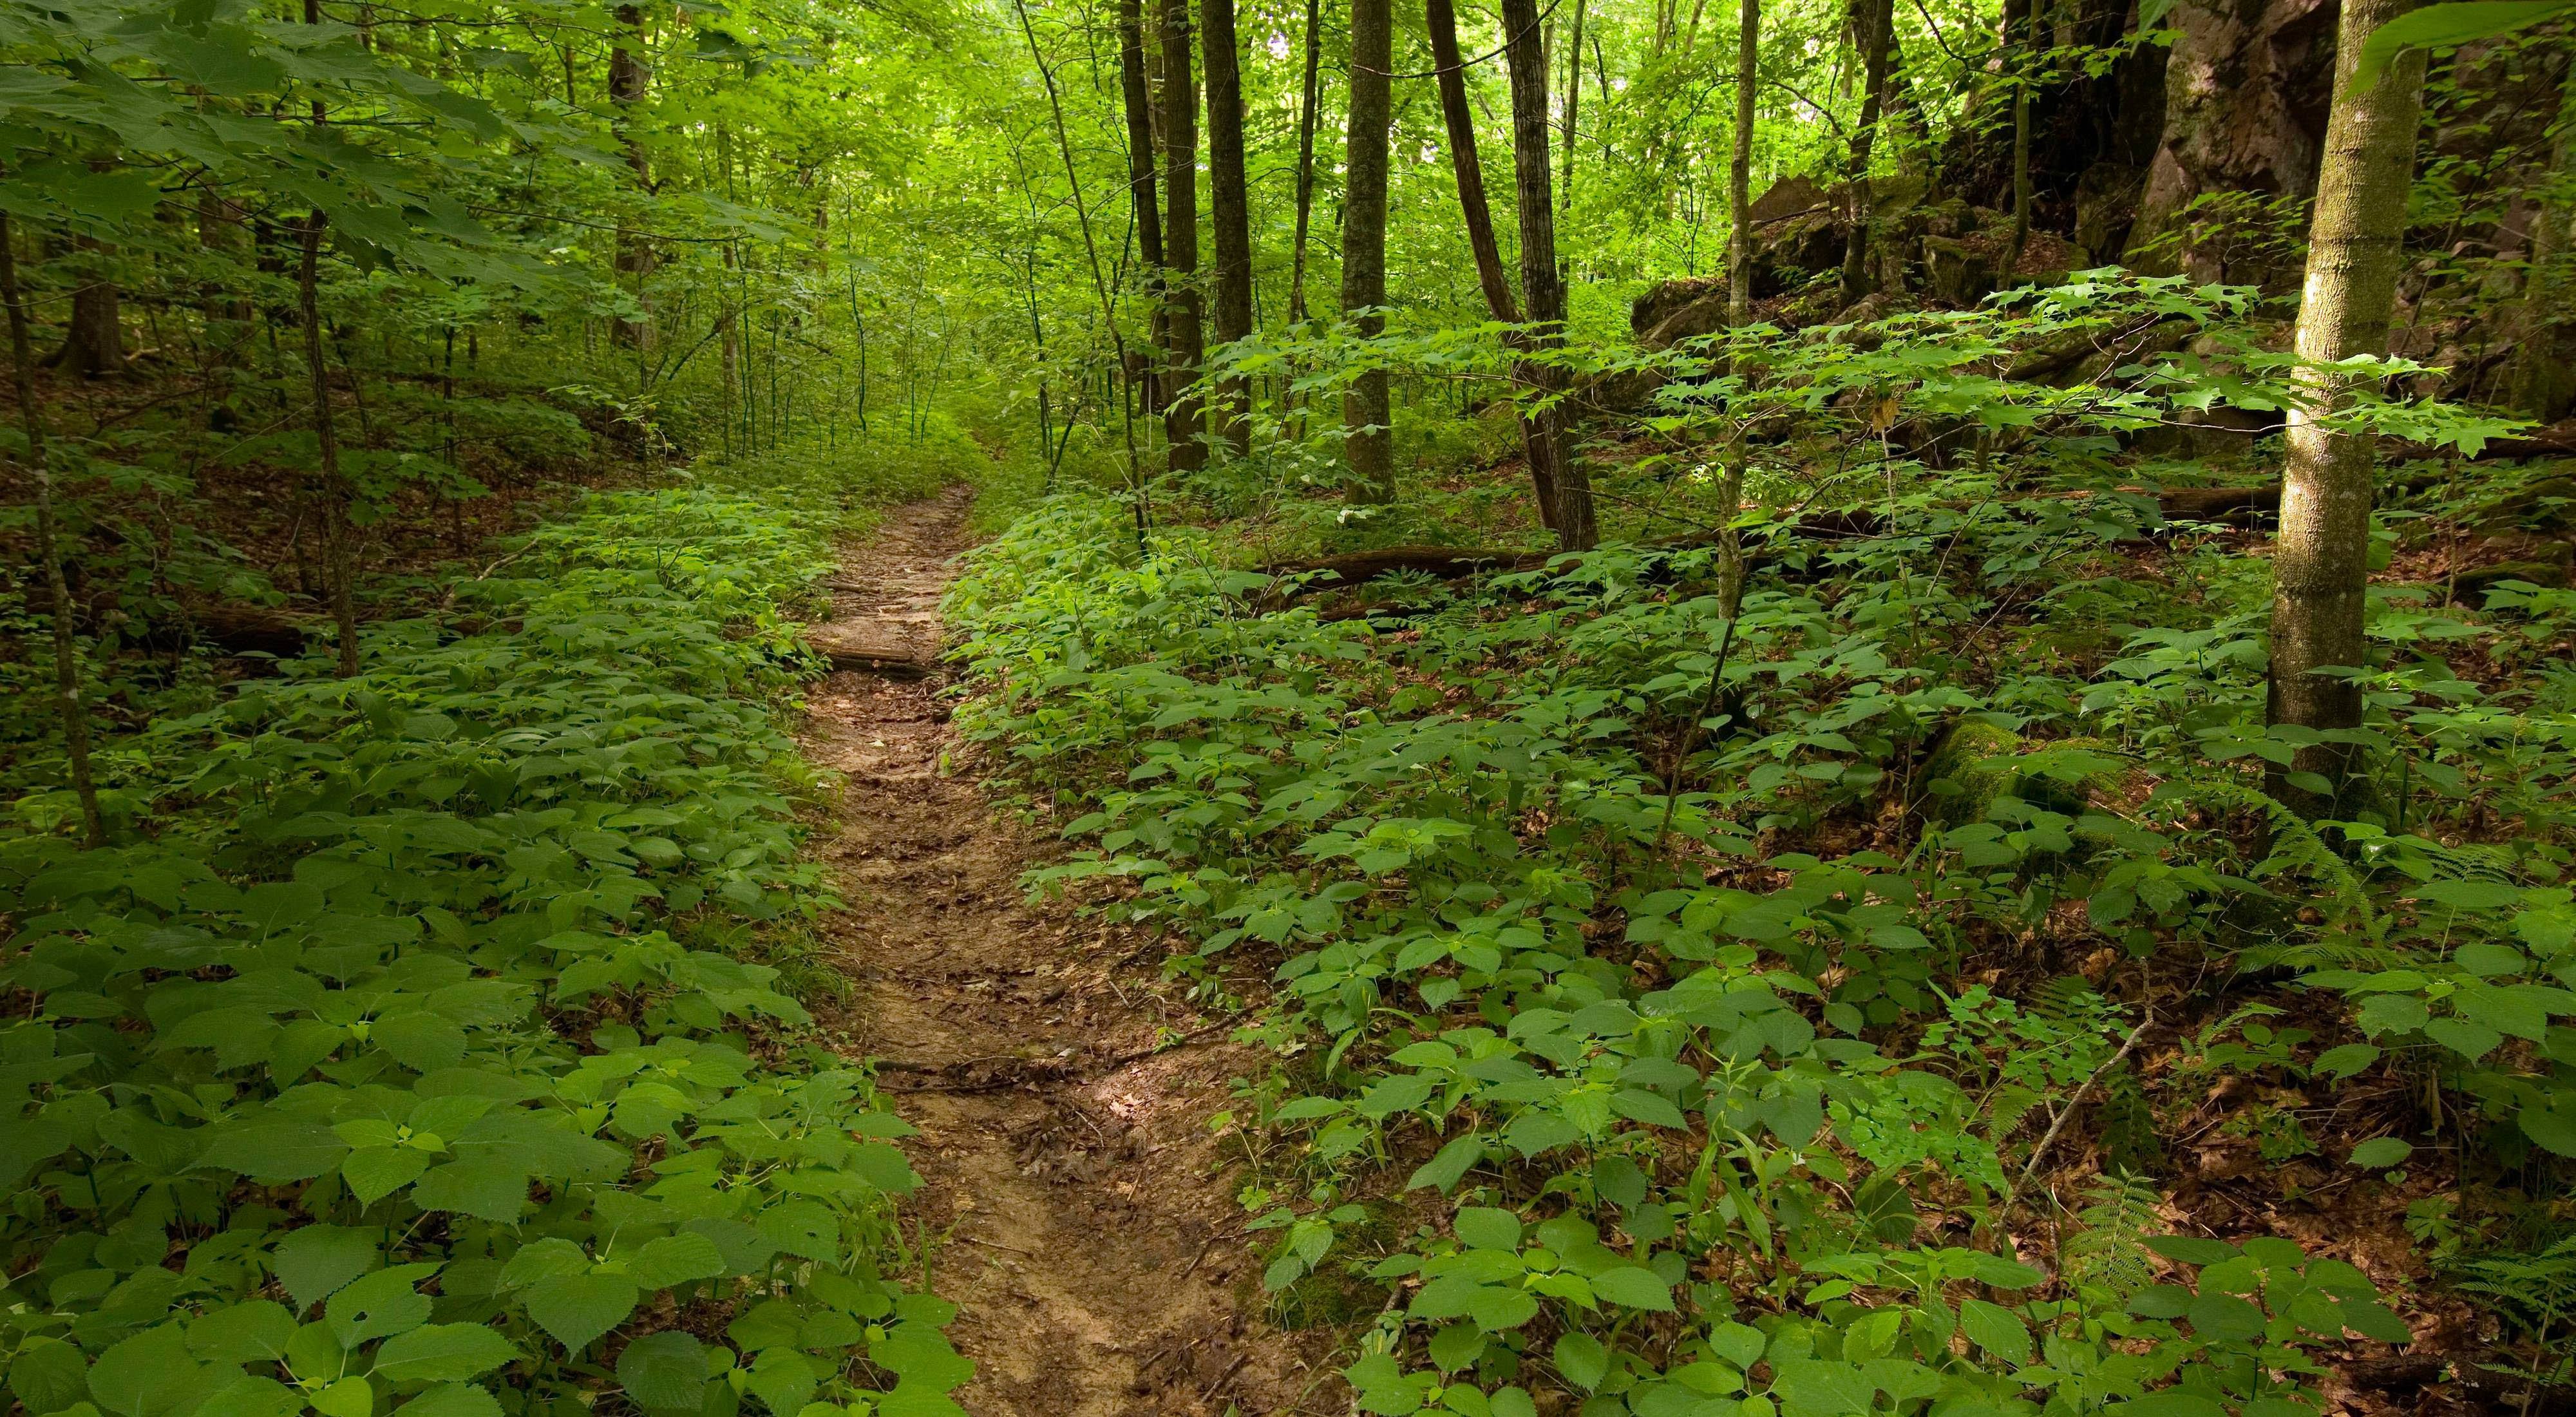 A dirt trail through a green forest with rock outcrops.